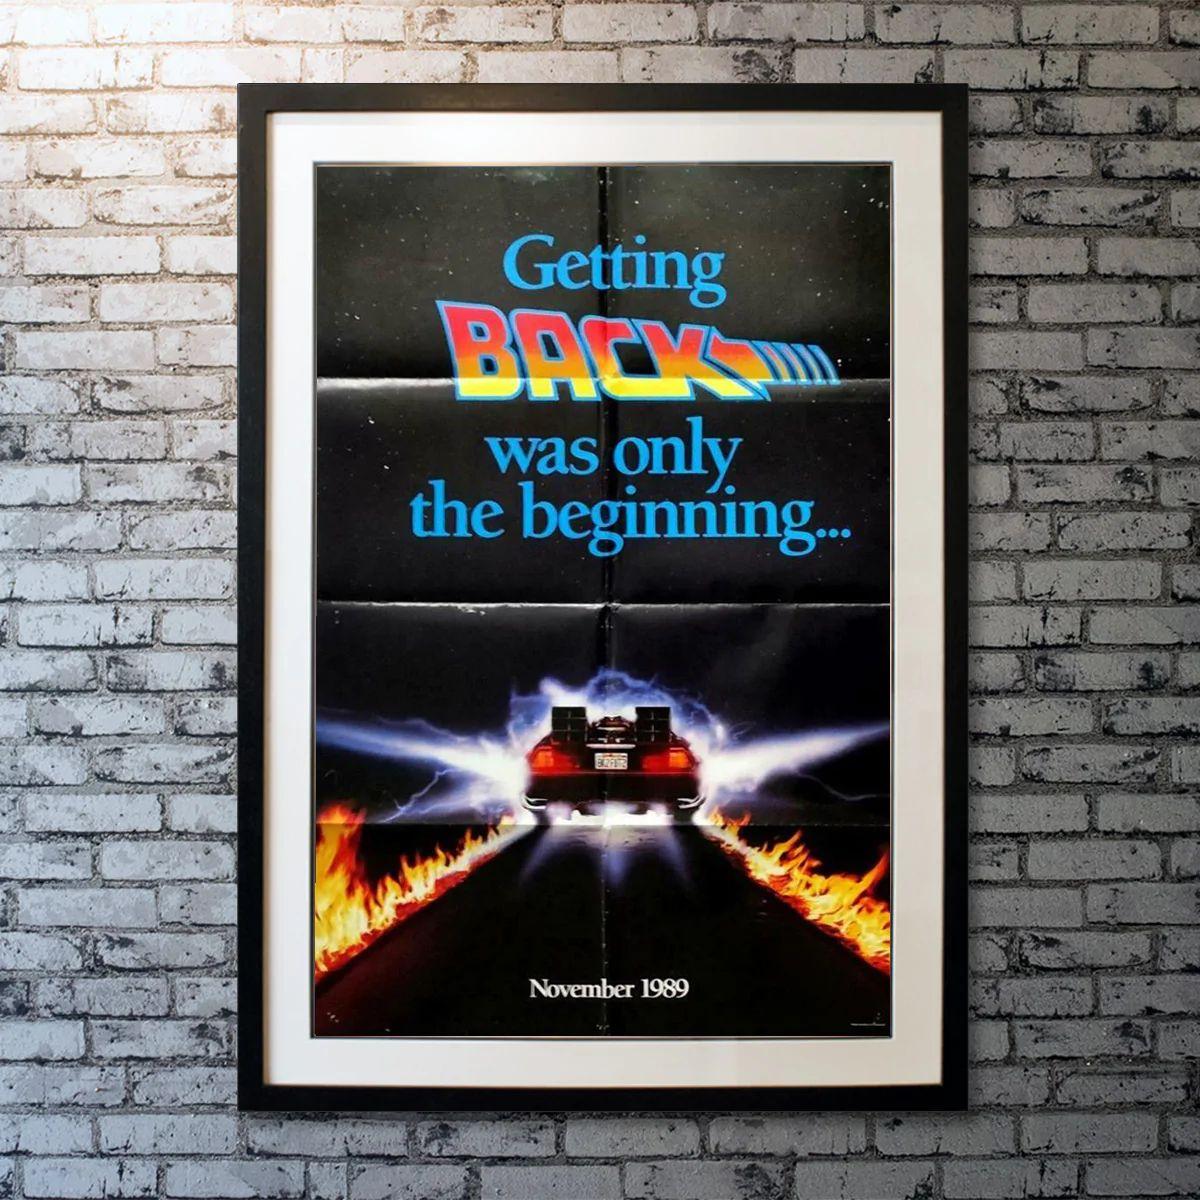 Back To The Future II, Unframed Poster, 1989

After visiting 2015, Marty McFly must repeat his visit to 1955 to prevent disastrous changes to 1985...without interfering with his first trip.

Year: 1989
Nationality: United States
Condition: